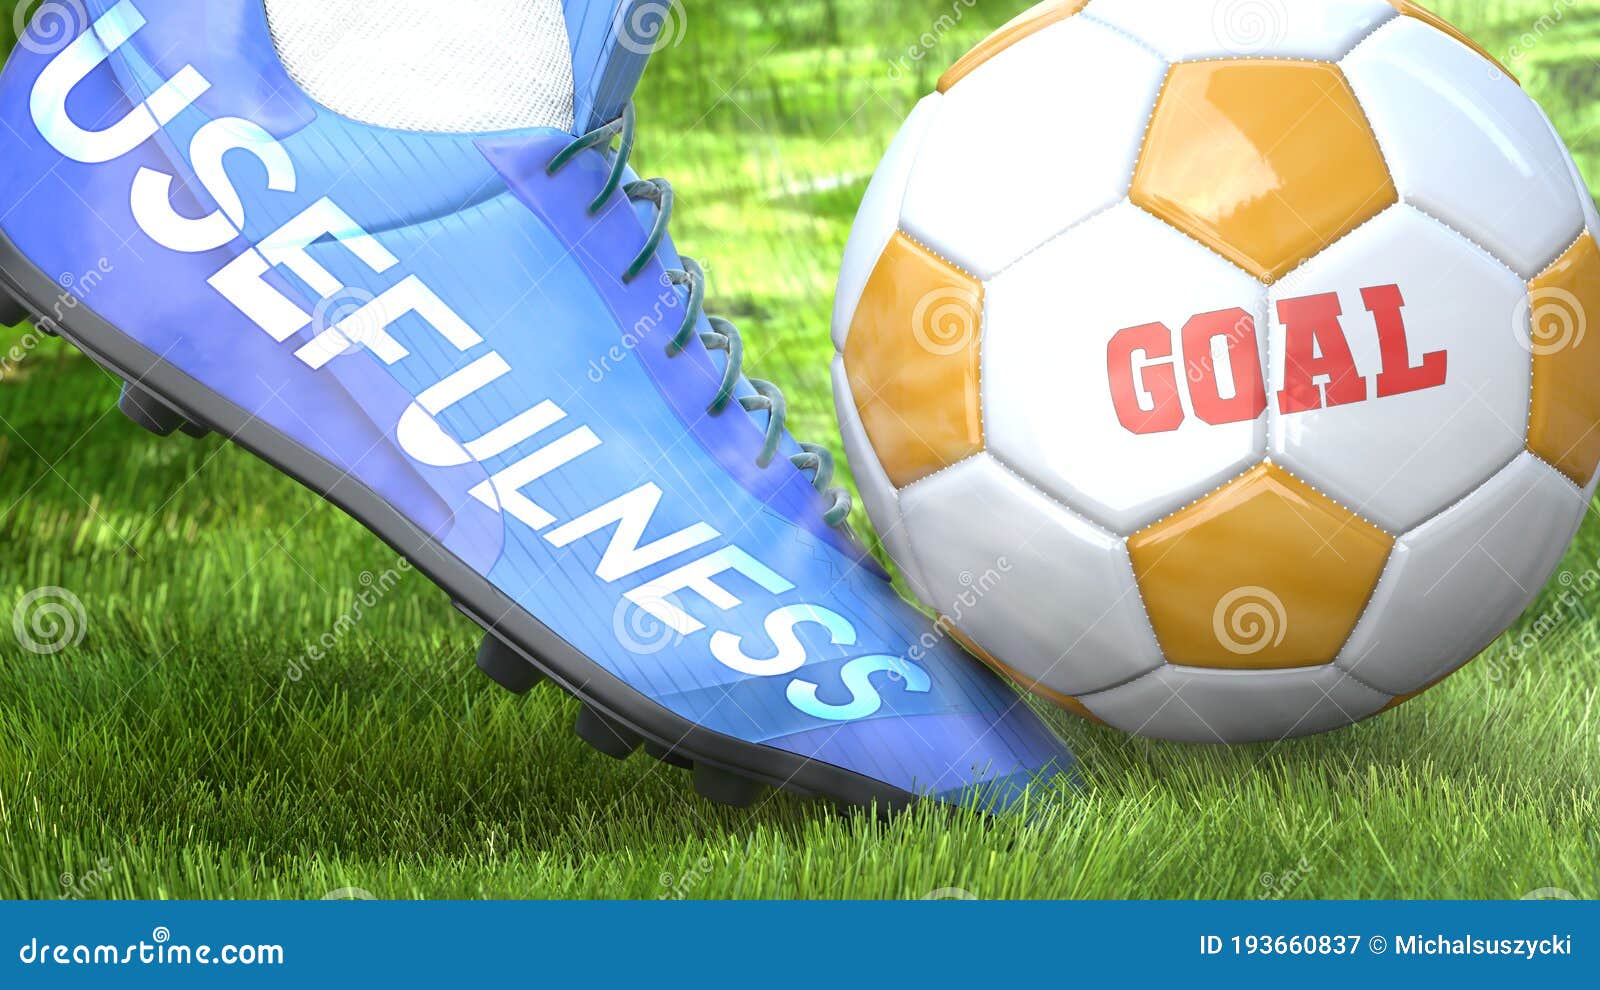 usefulness and a life goal - pictured as word usefulness on a football shoe to ize that usefulness can impact a goal and is